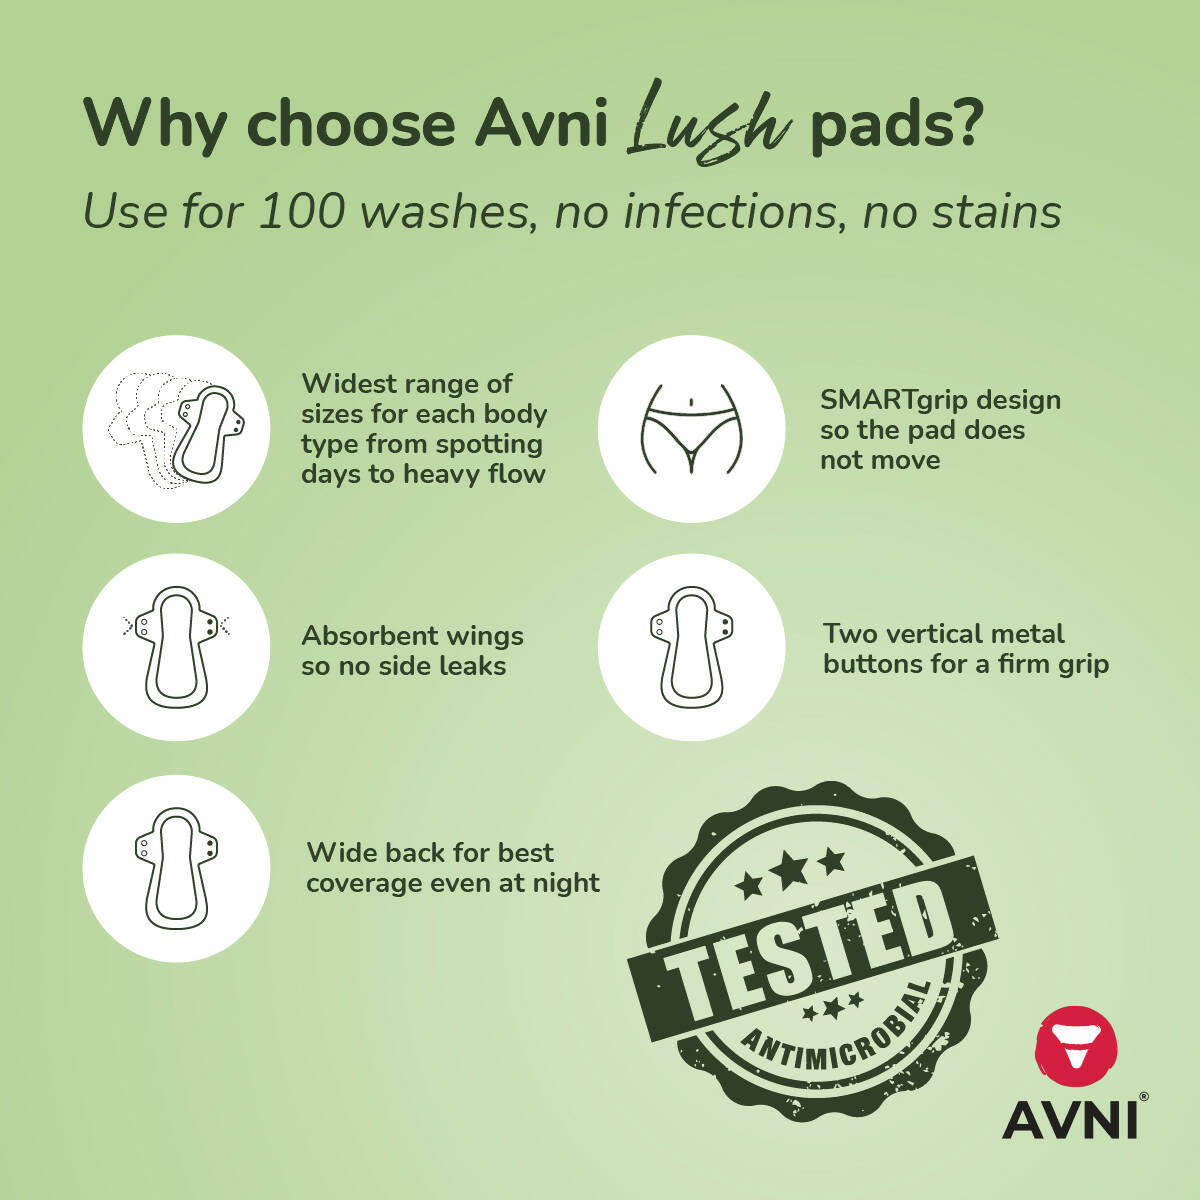 Avni Lush Certified 100% Organic Cotton Washable Cloth Pads, Regular Size (R-240MM, Pack of 2) + Avni Natural Cloth Pad wash - 100ml (Combo Pack of 3) Wemy Store